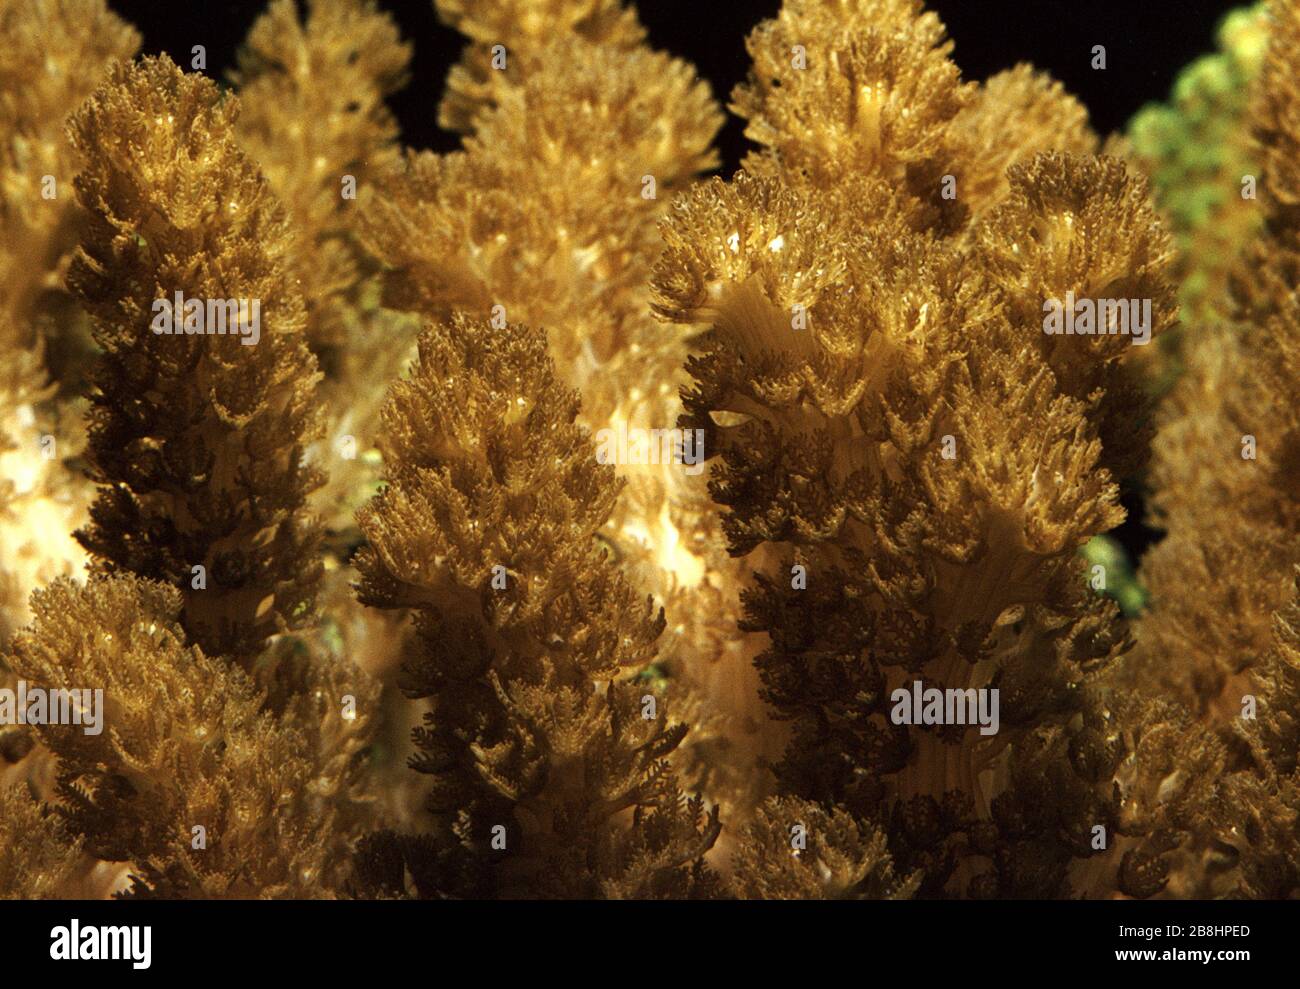 Hairy leather coral, Paralemnalia sp. Stock Photo